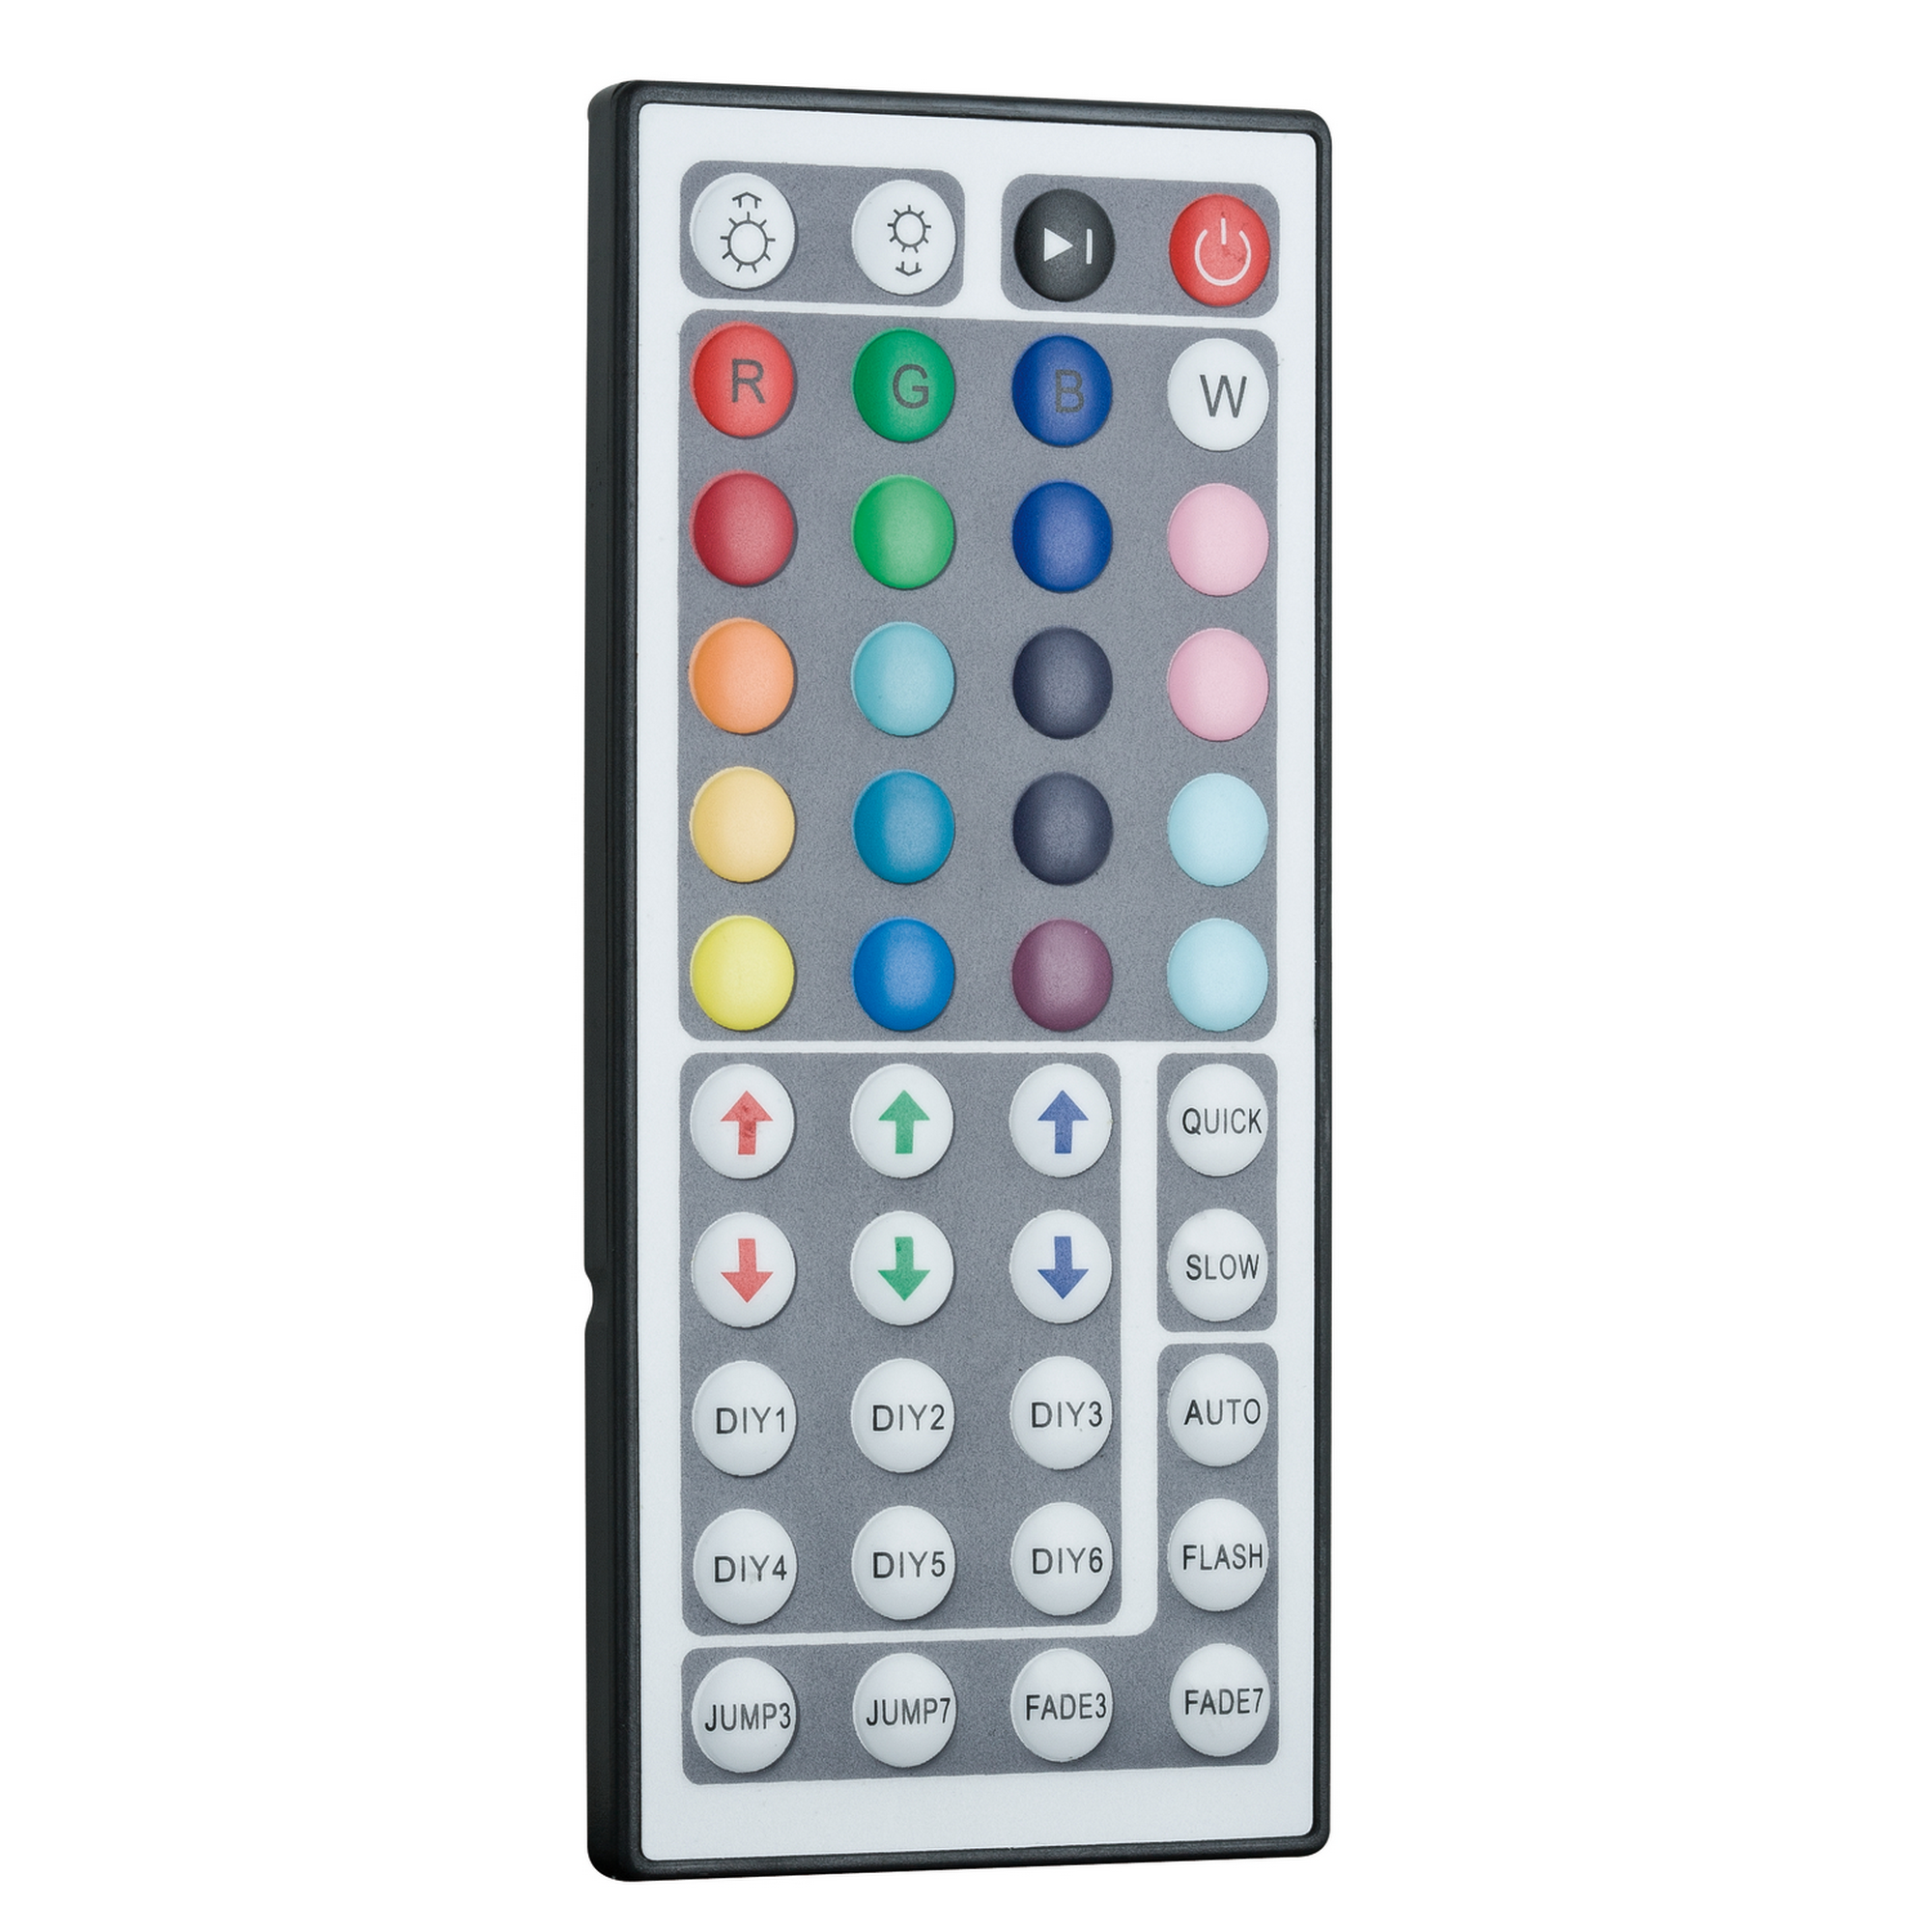 LED-Controller RGB "YourLED" mit Infrarot-Fernbedienung + product picture